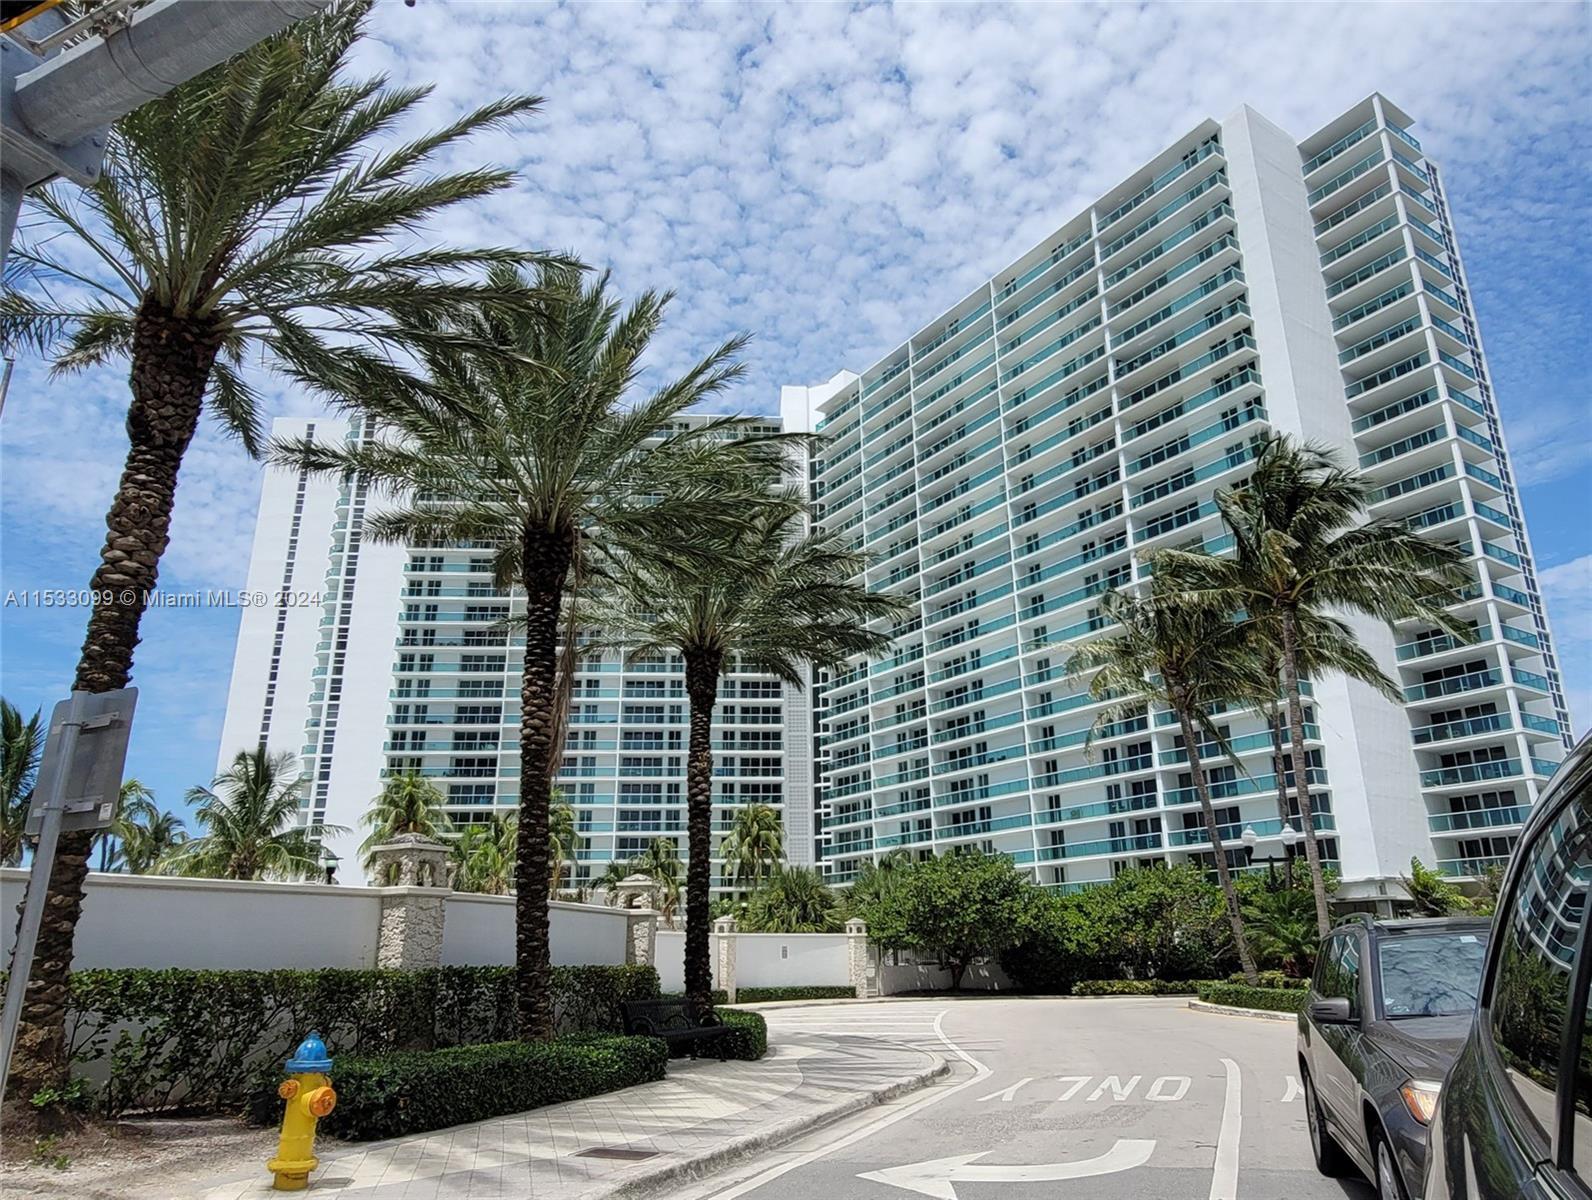 Renovated and fully furnished condo unit featuring 2b/2b in Sunny Isles Beach, across the ocean. Uni